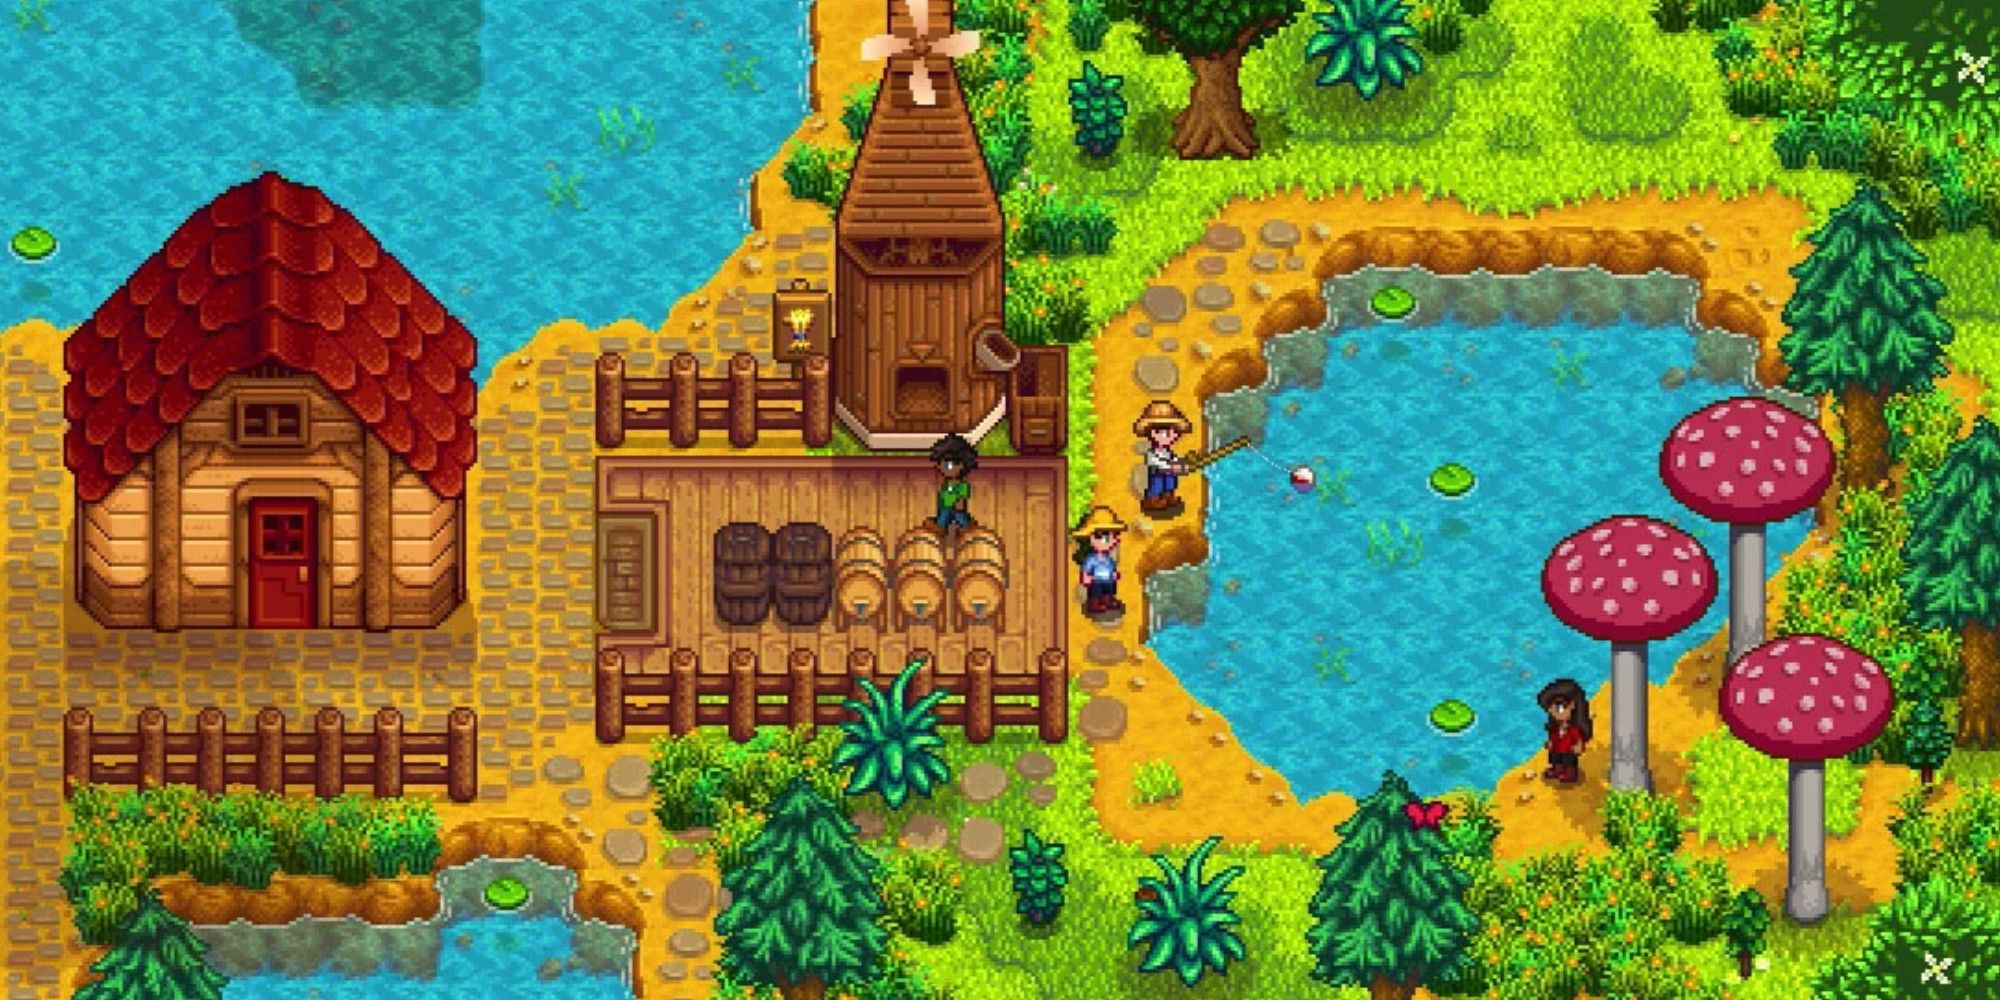 Stardew Valley - The farmer fishing next to a pond